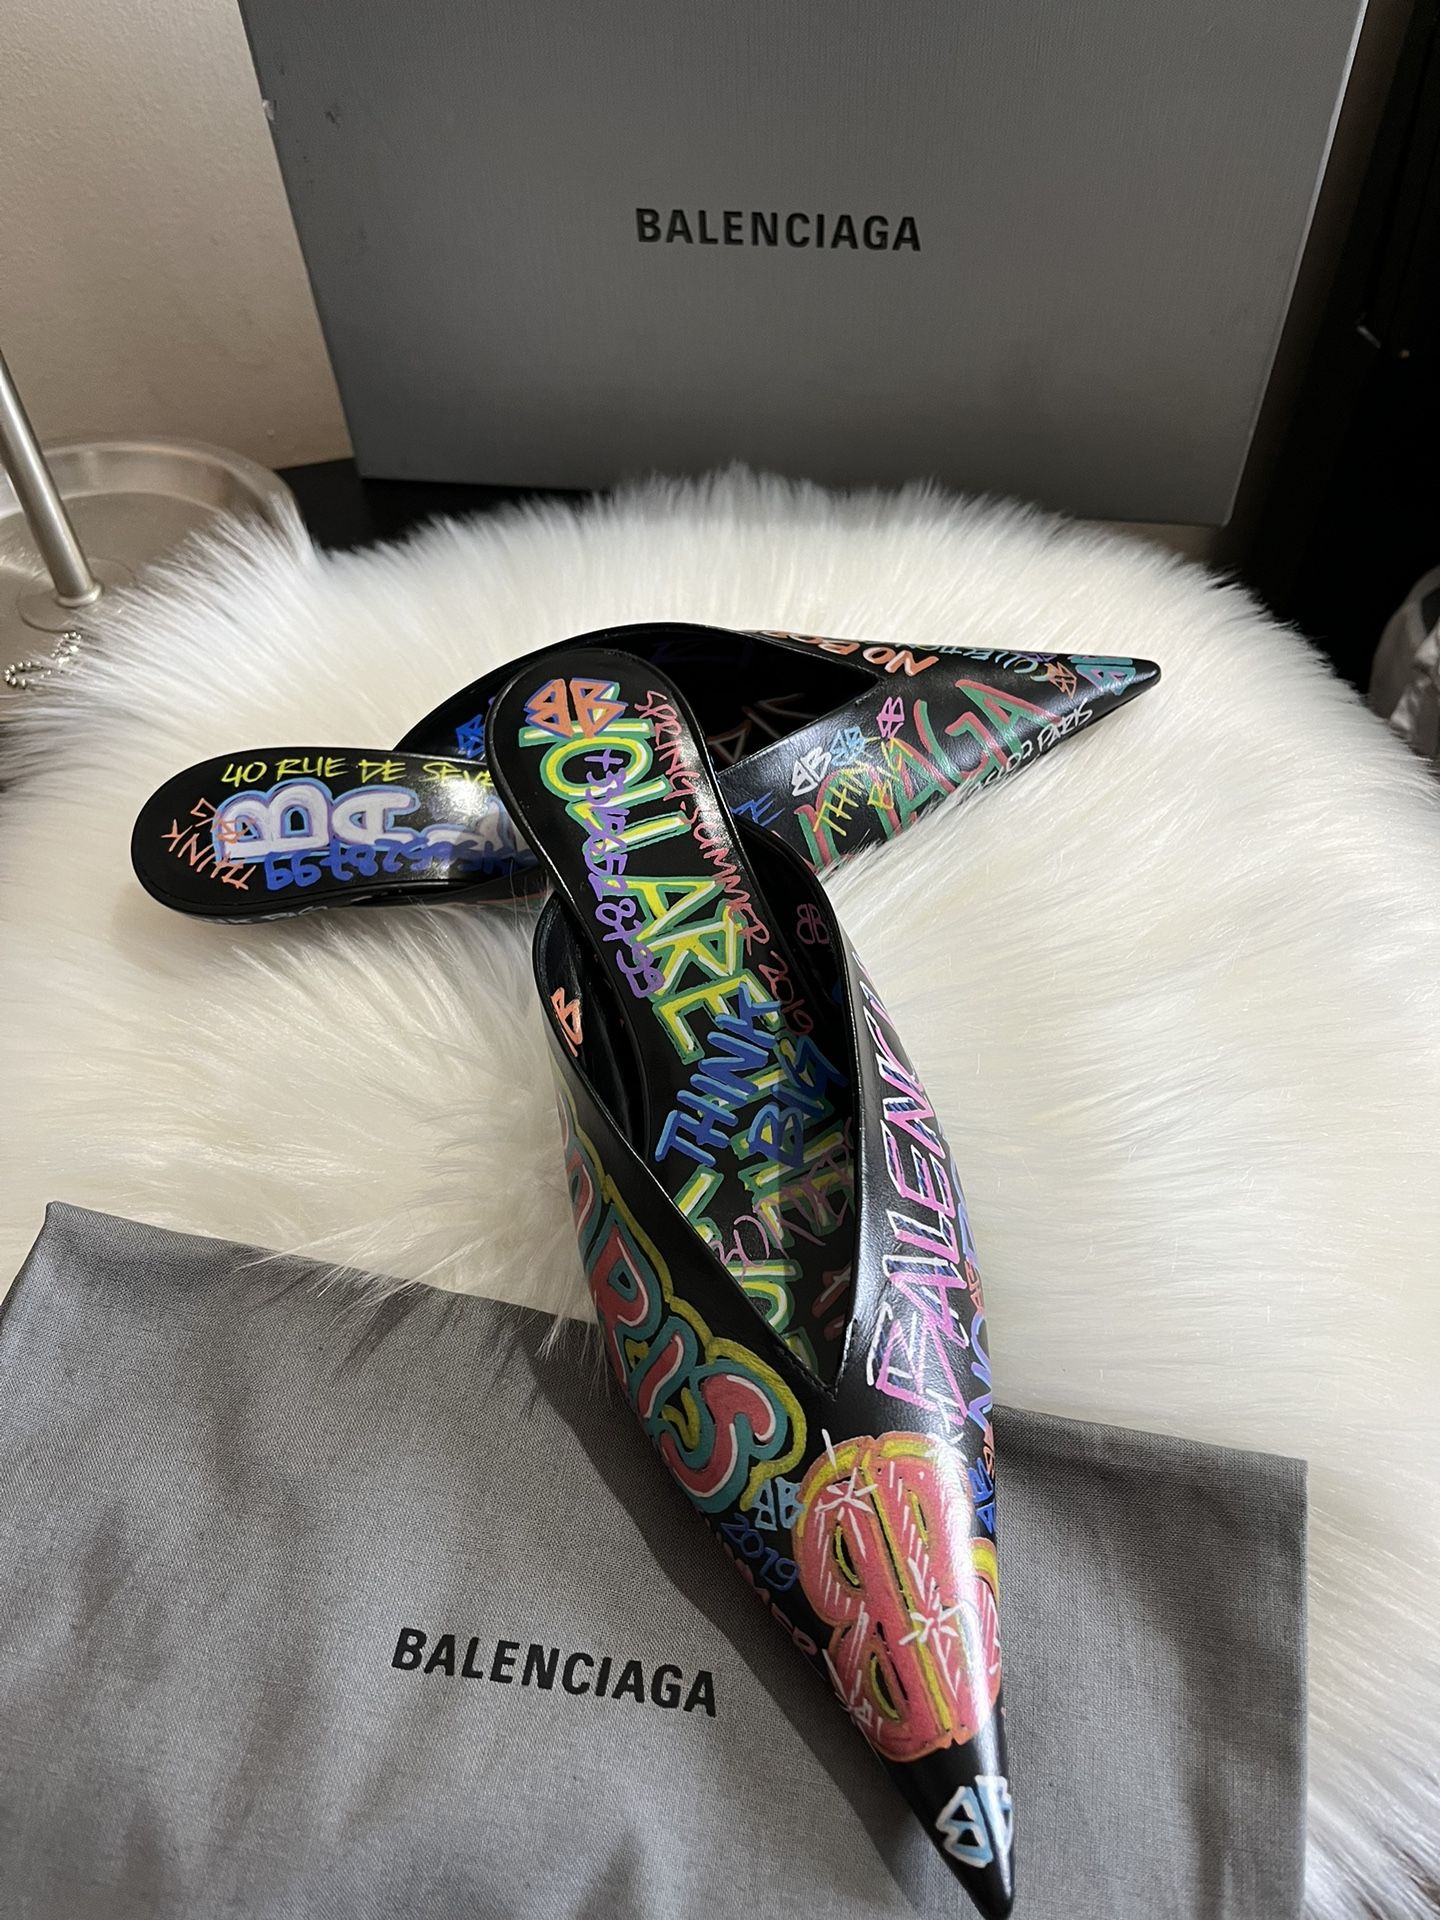 Balenciaga Black Graffiti Knife Pointed Toe Mules Size 37 for Sale in Chicago, IL - OfferUp